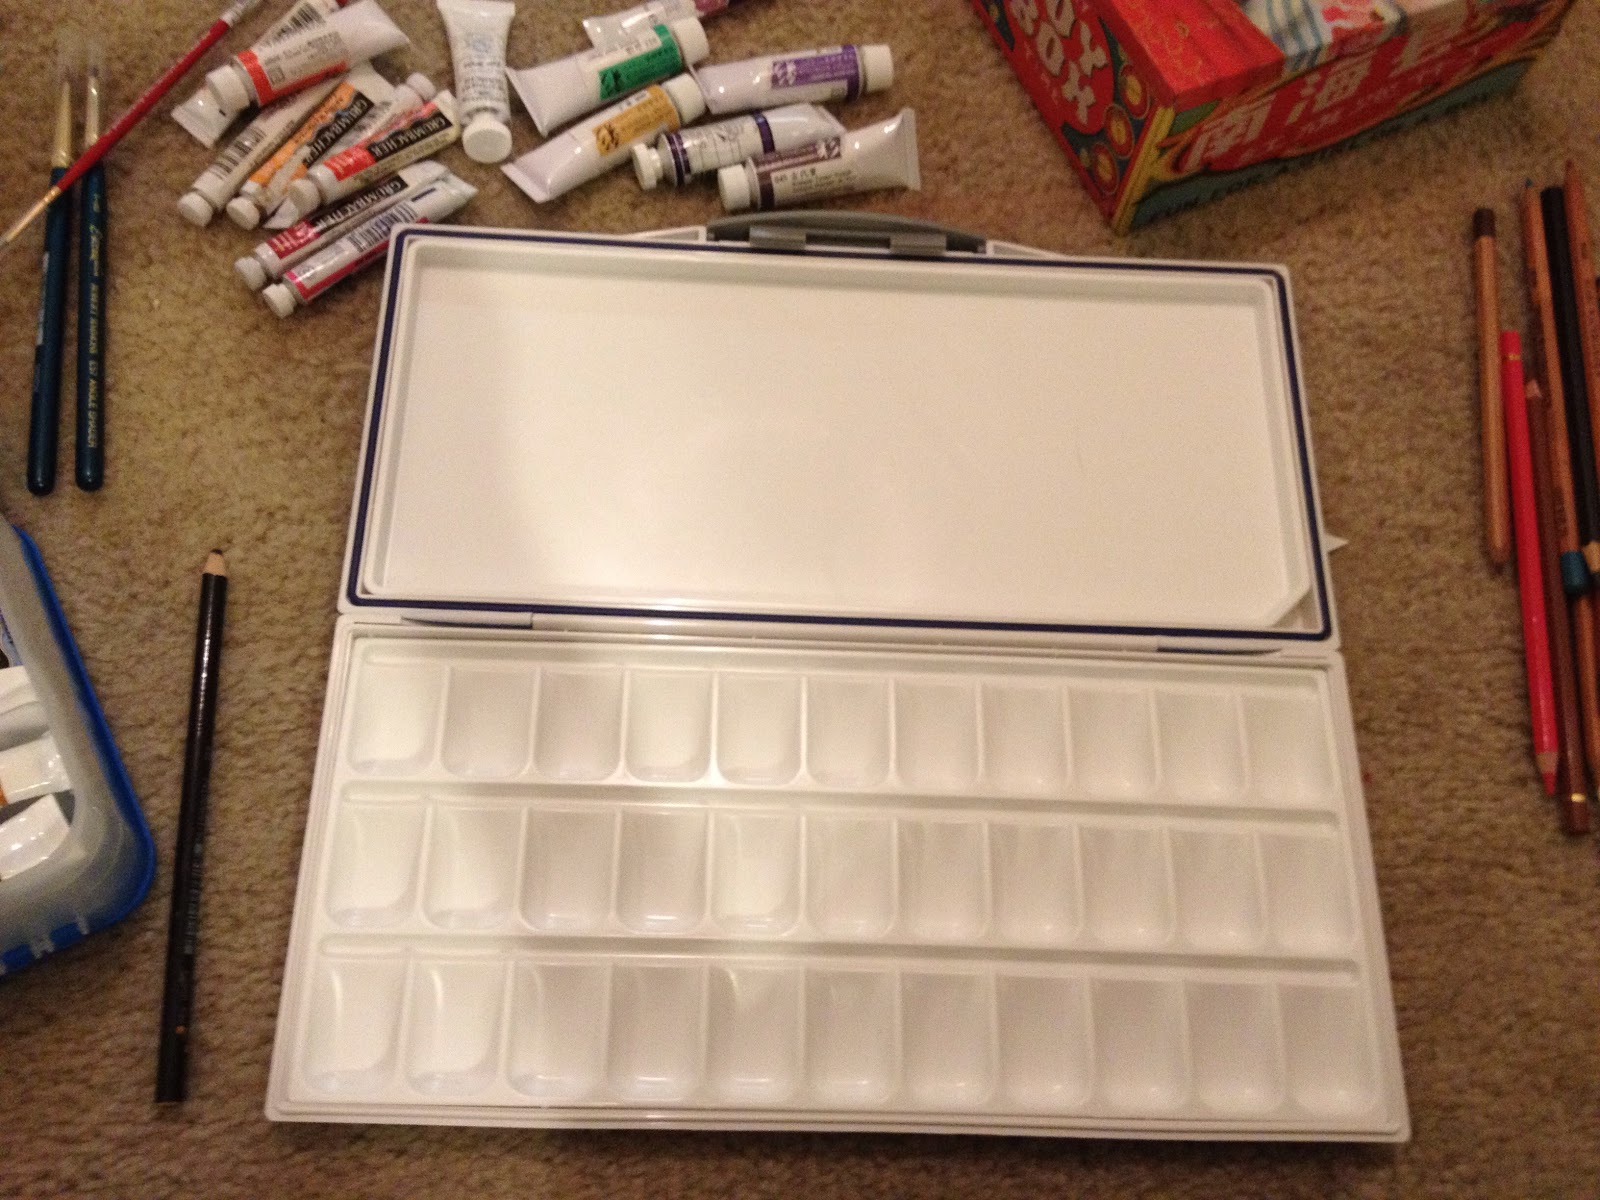 Chris.W Watercolor Palette Empty Paint Tray, Travel Watercolor Storage Tin  Case, 24 Wells Folding Palet for Artist Art Students Kids